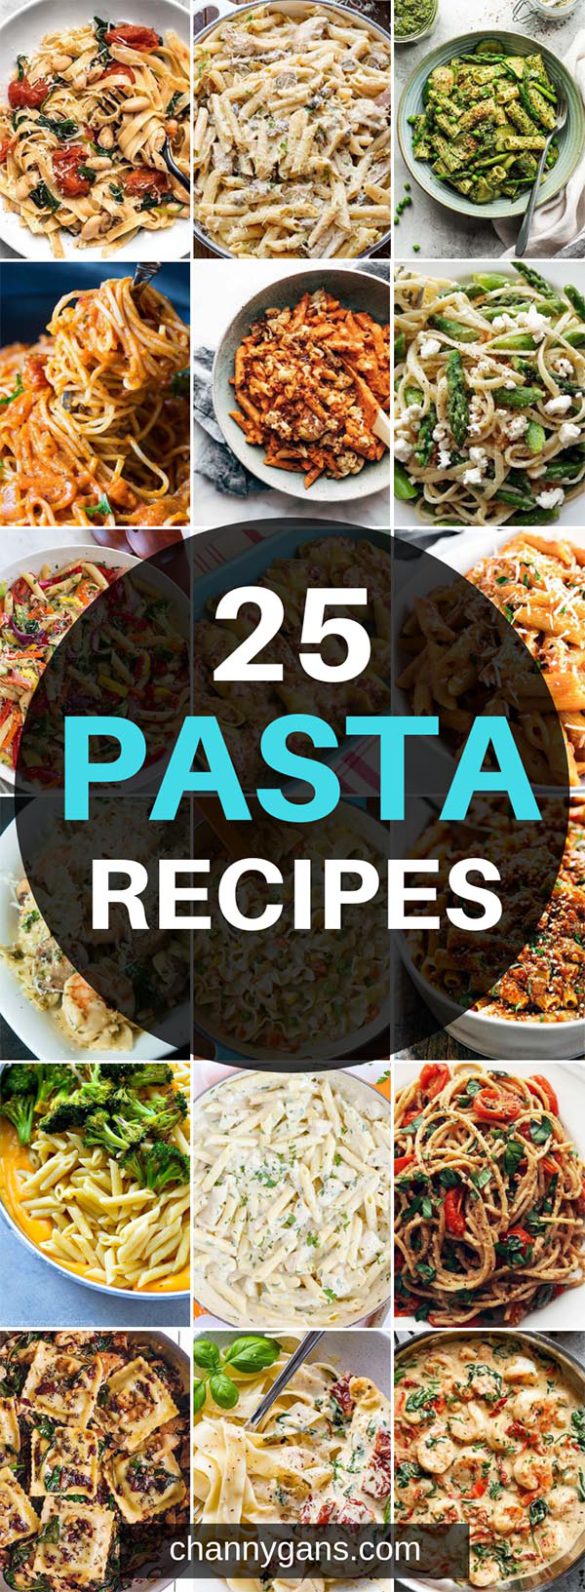 25 Perfect Pasta Recipes That Are Filling & Delicious